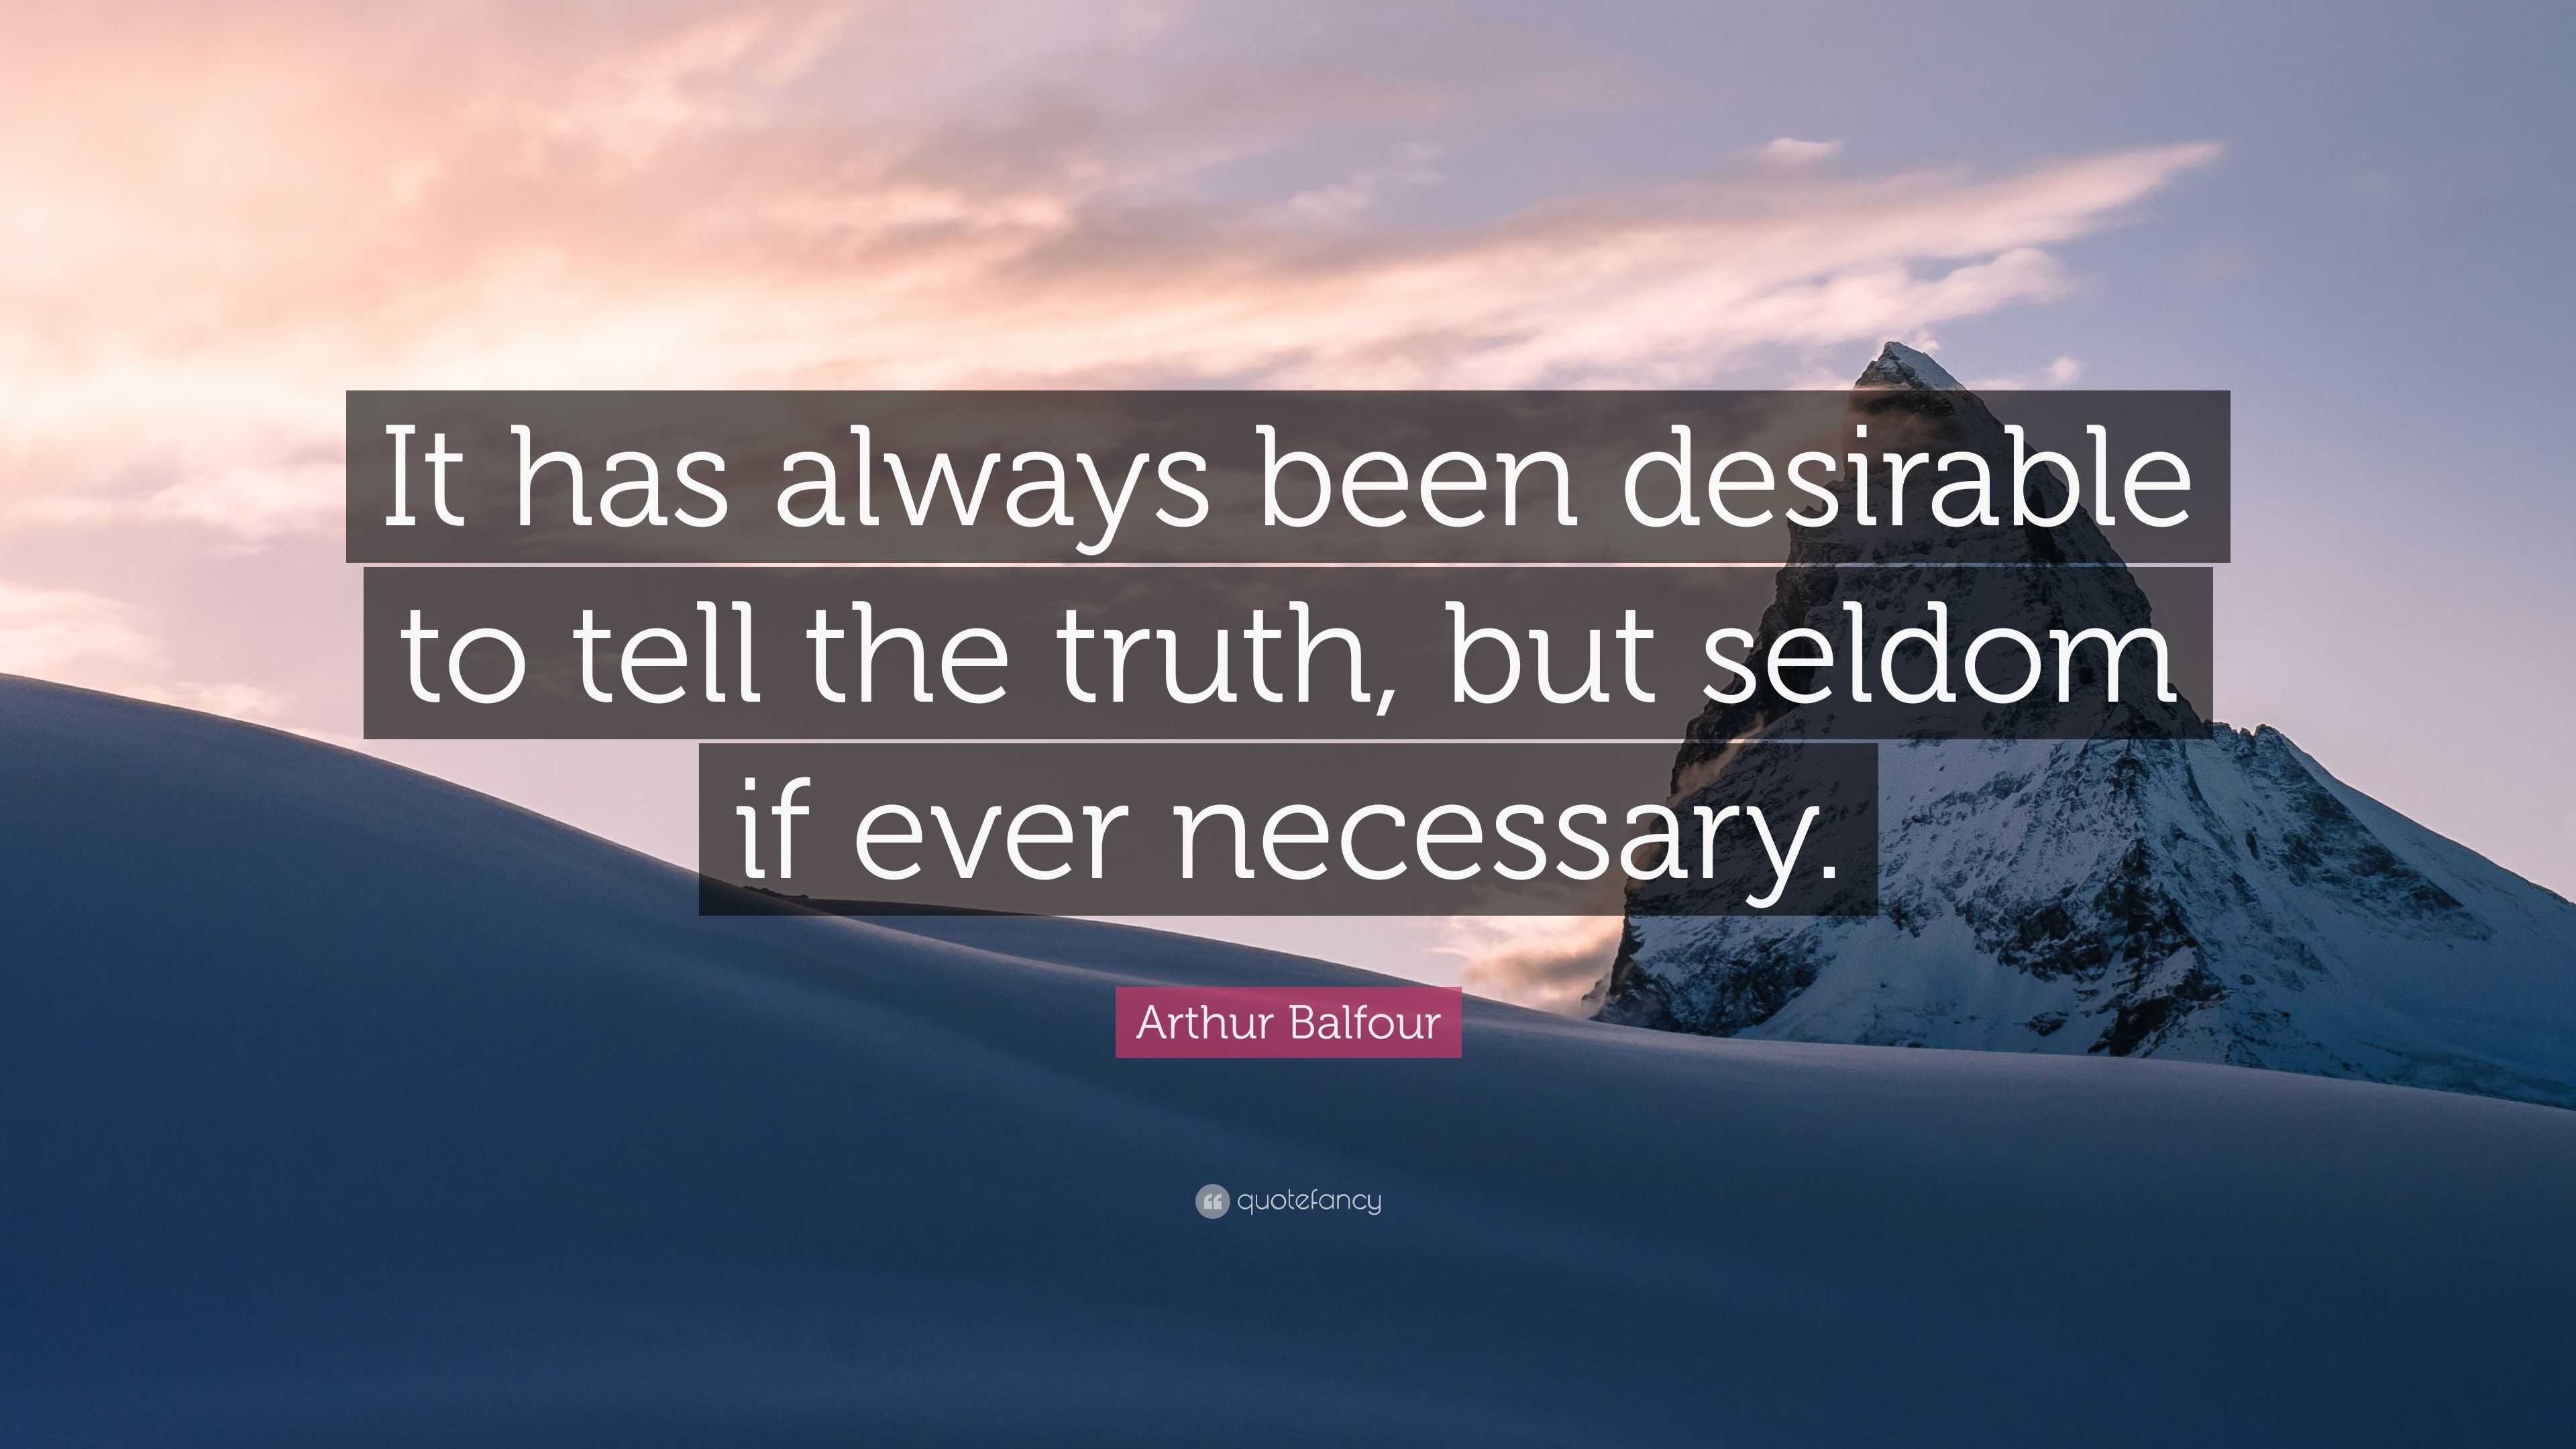 Arthur Balfour Quote: “It has always been desirable to tell the truth ...